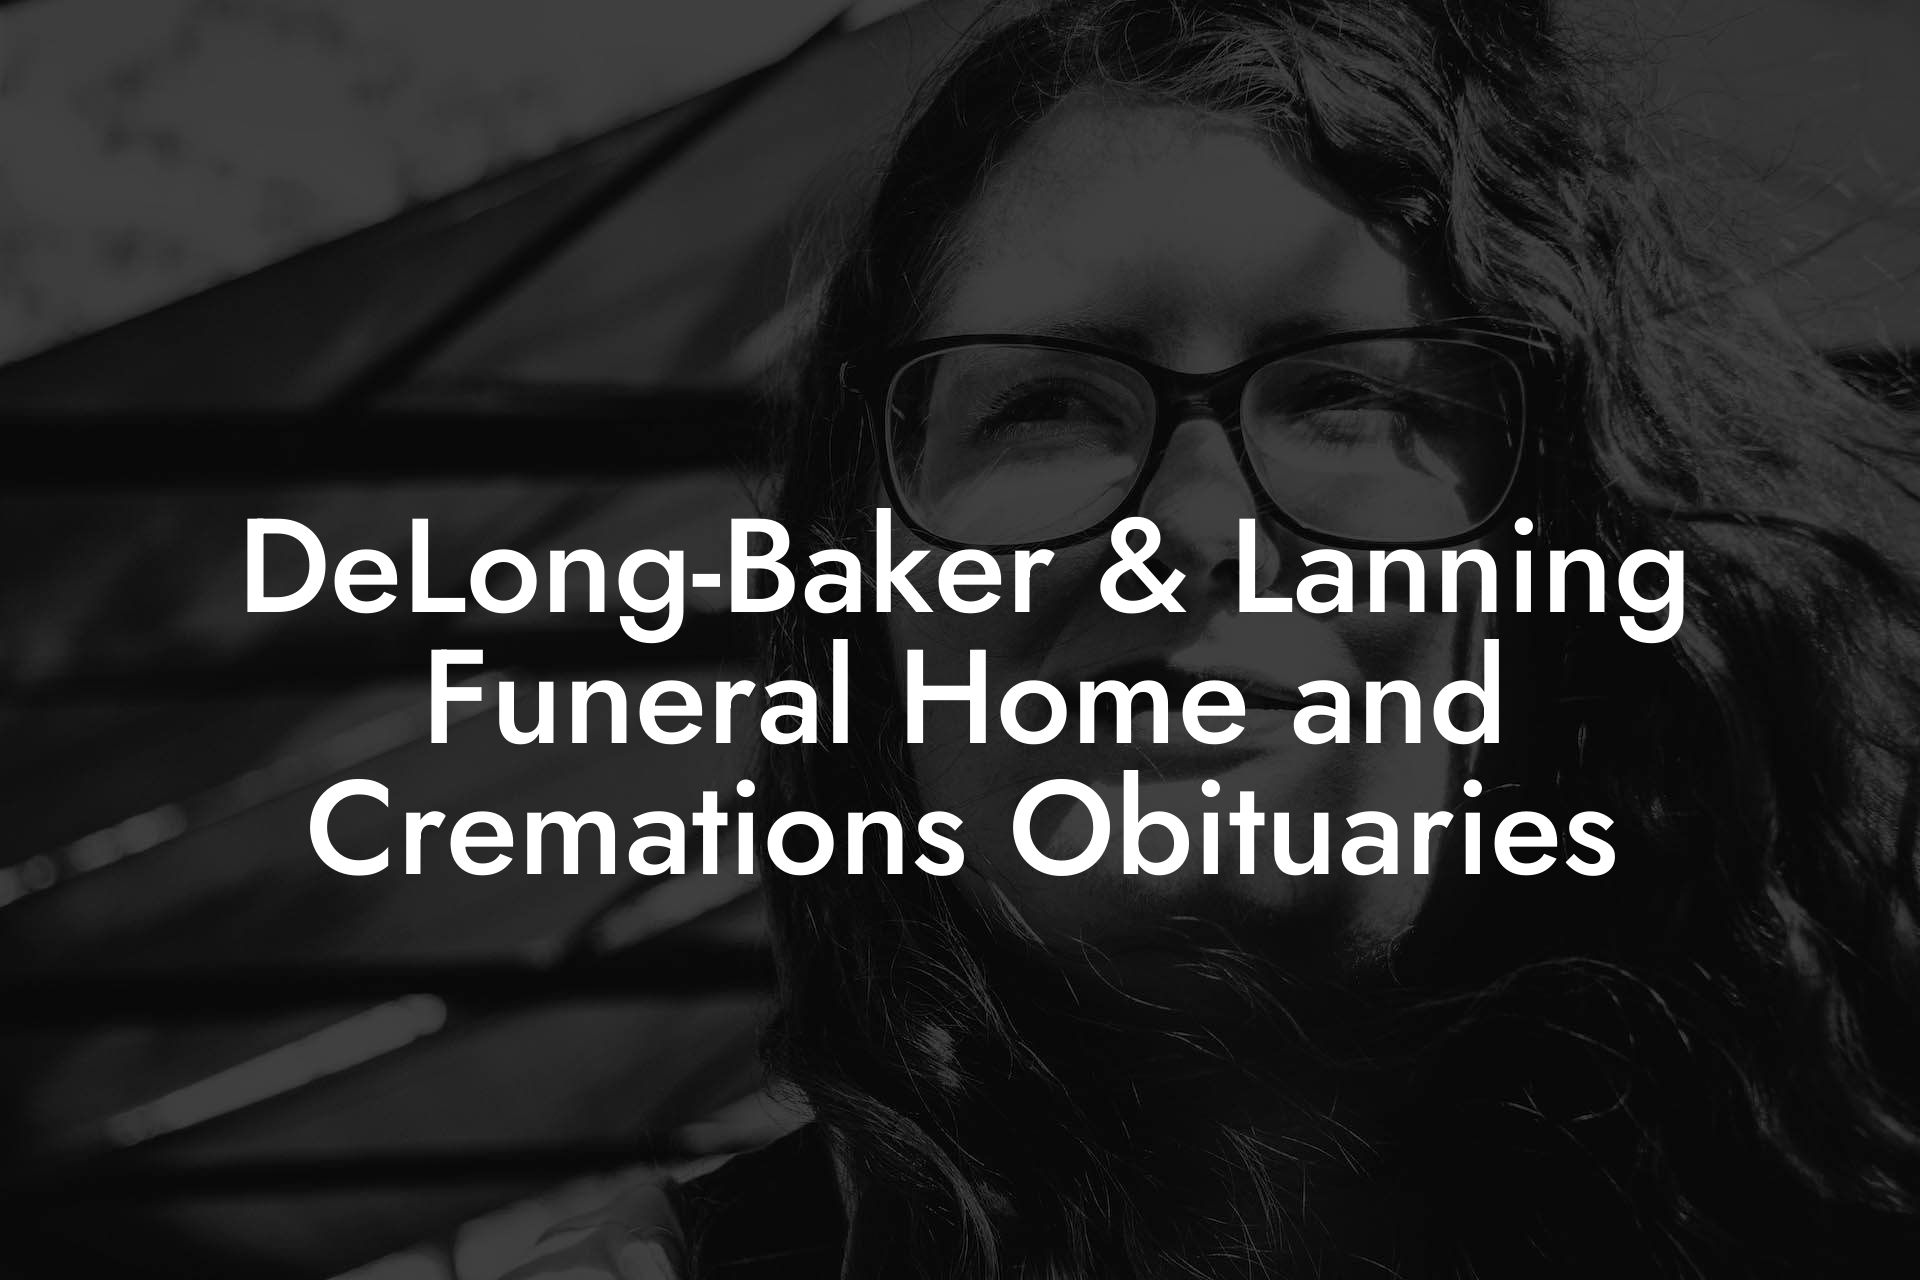 DeLong-Baker & Lanning Funeral Home and Cremations Obituaries